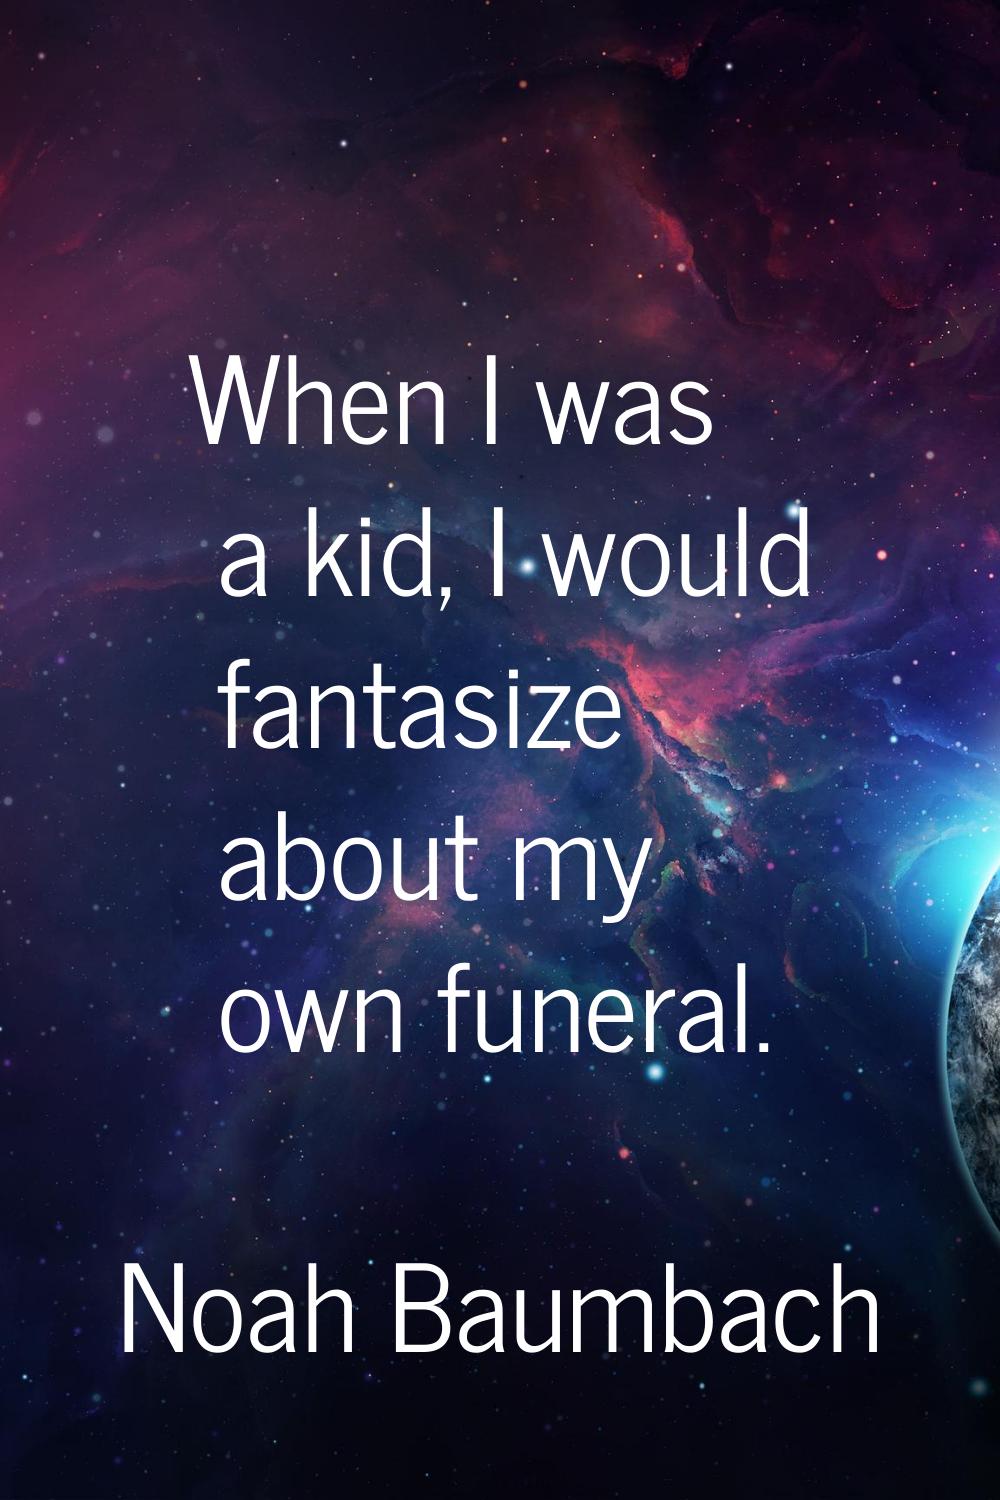 When I was a kid, I would fantasize about my own funeral.